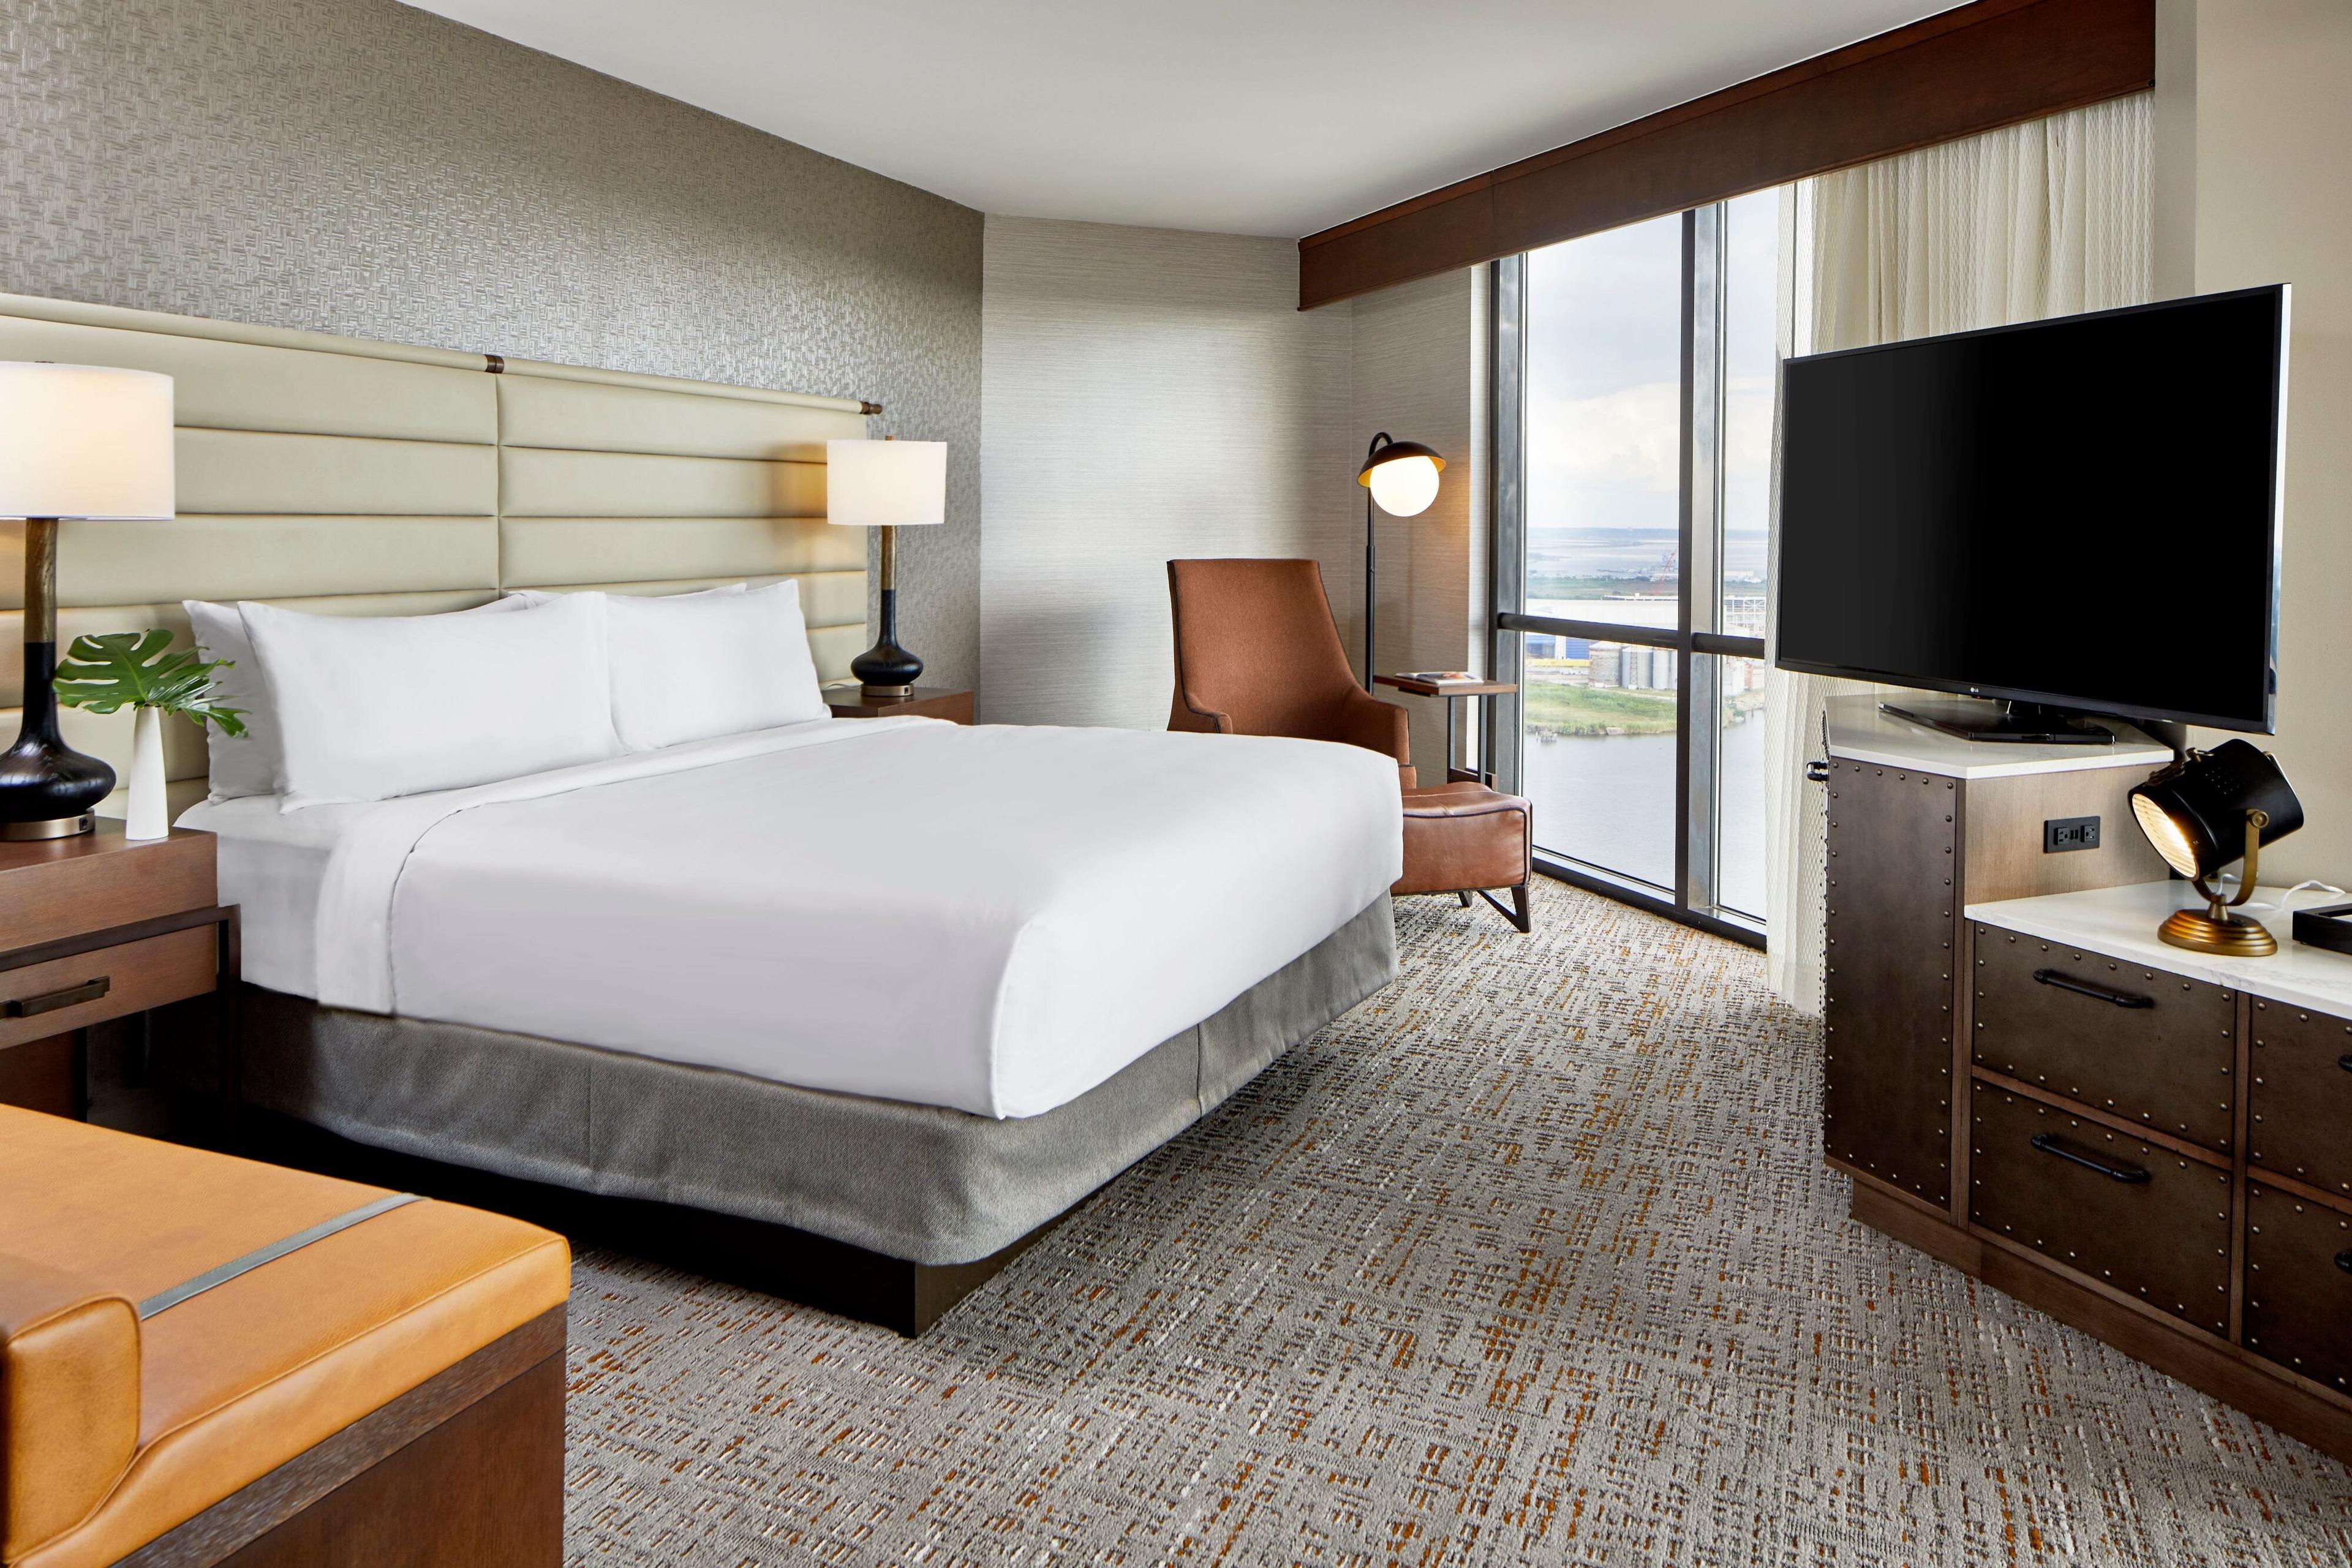 Corner King Guest Rooms feature a larger room with great views of the City of Mobile.